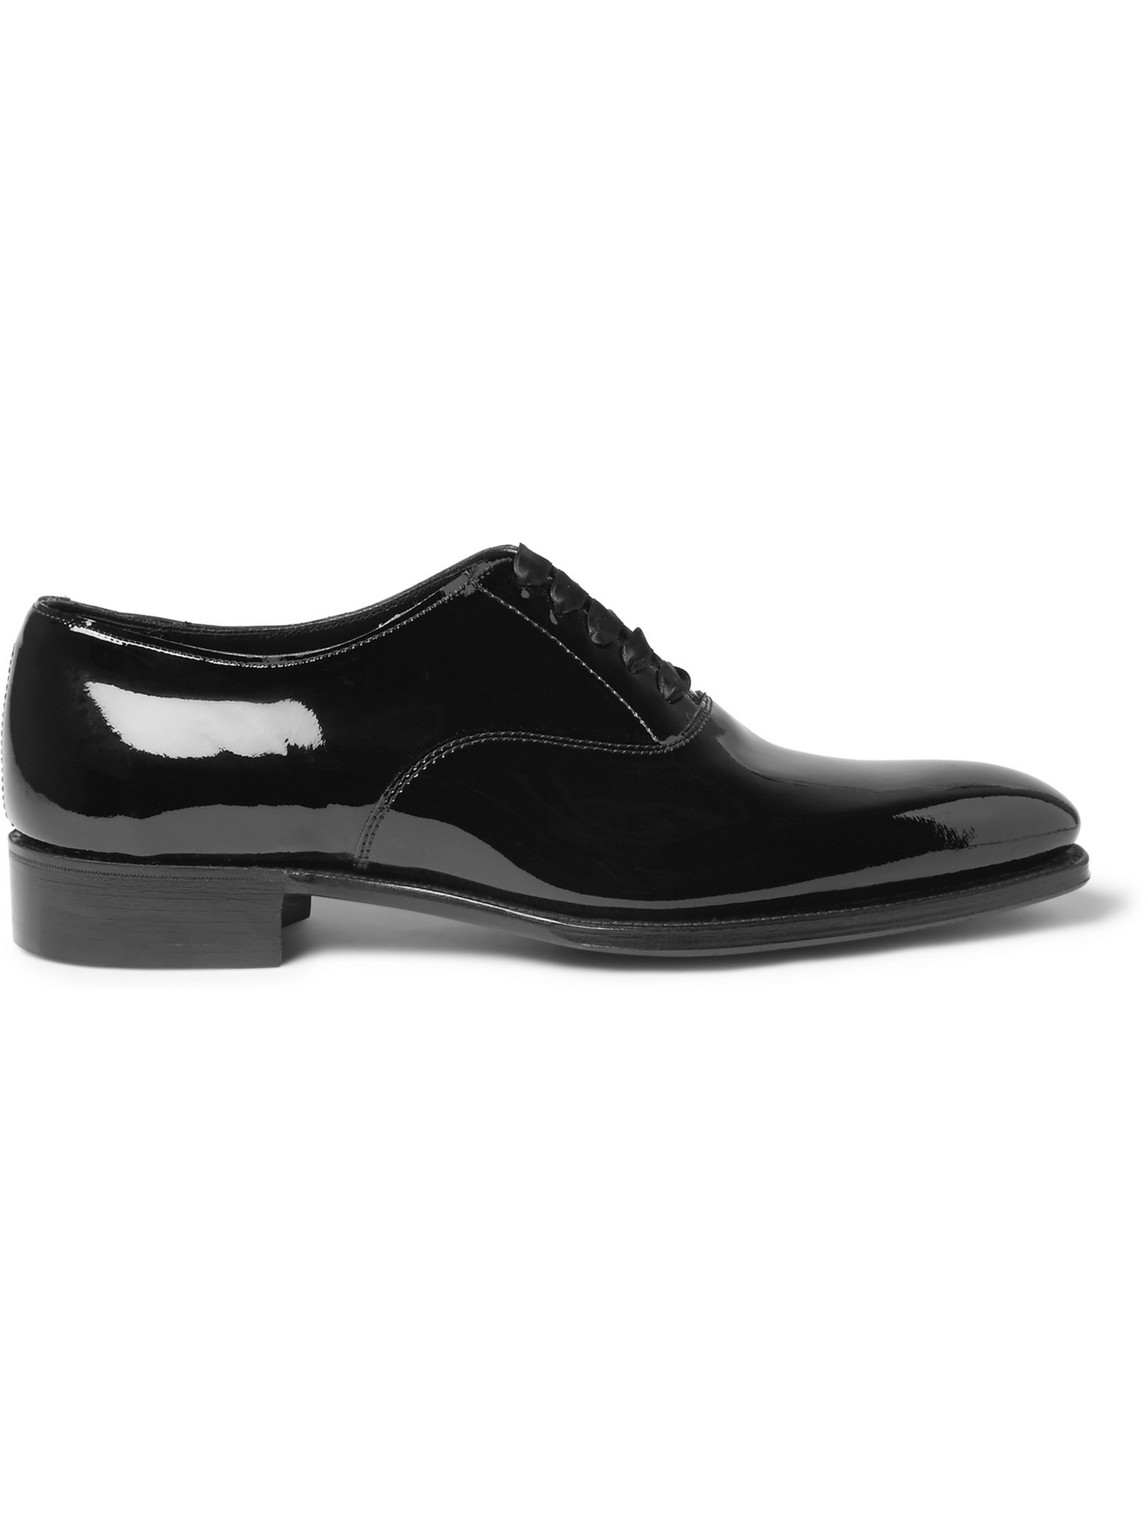 Kingsman George Cleverley Patent-leather Oxford Shoes In Black